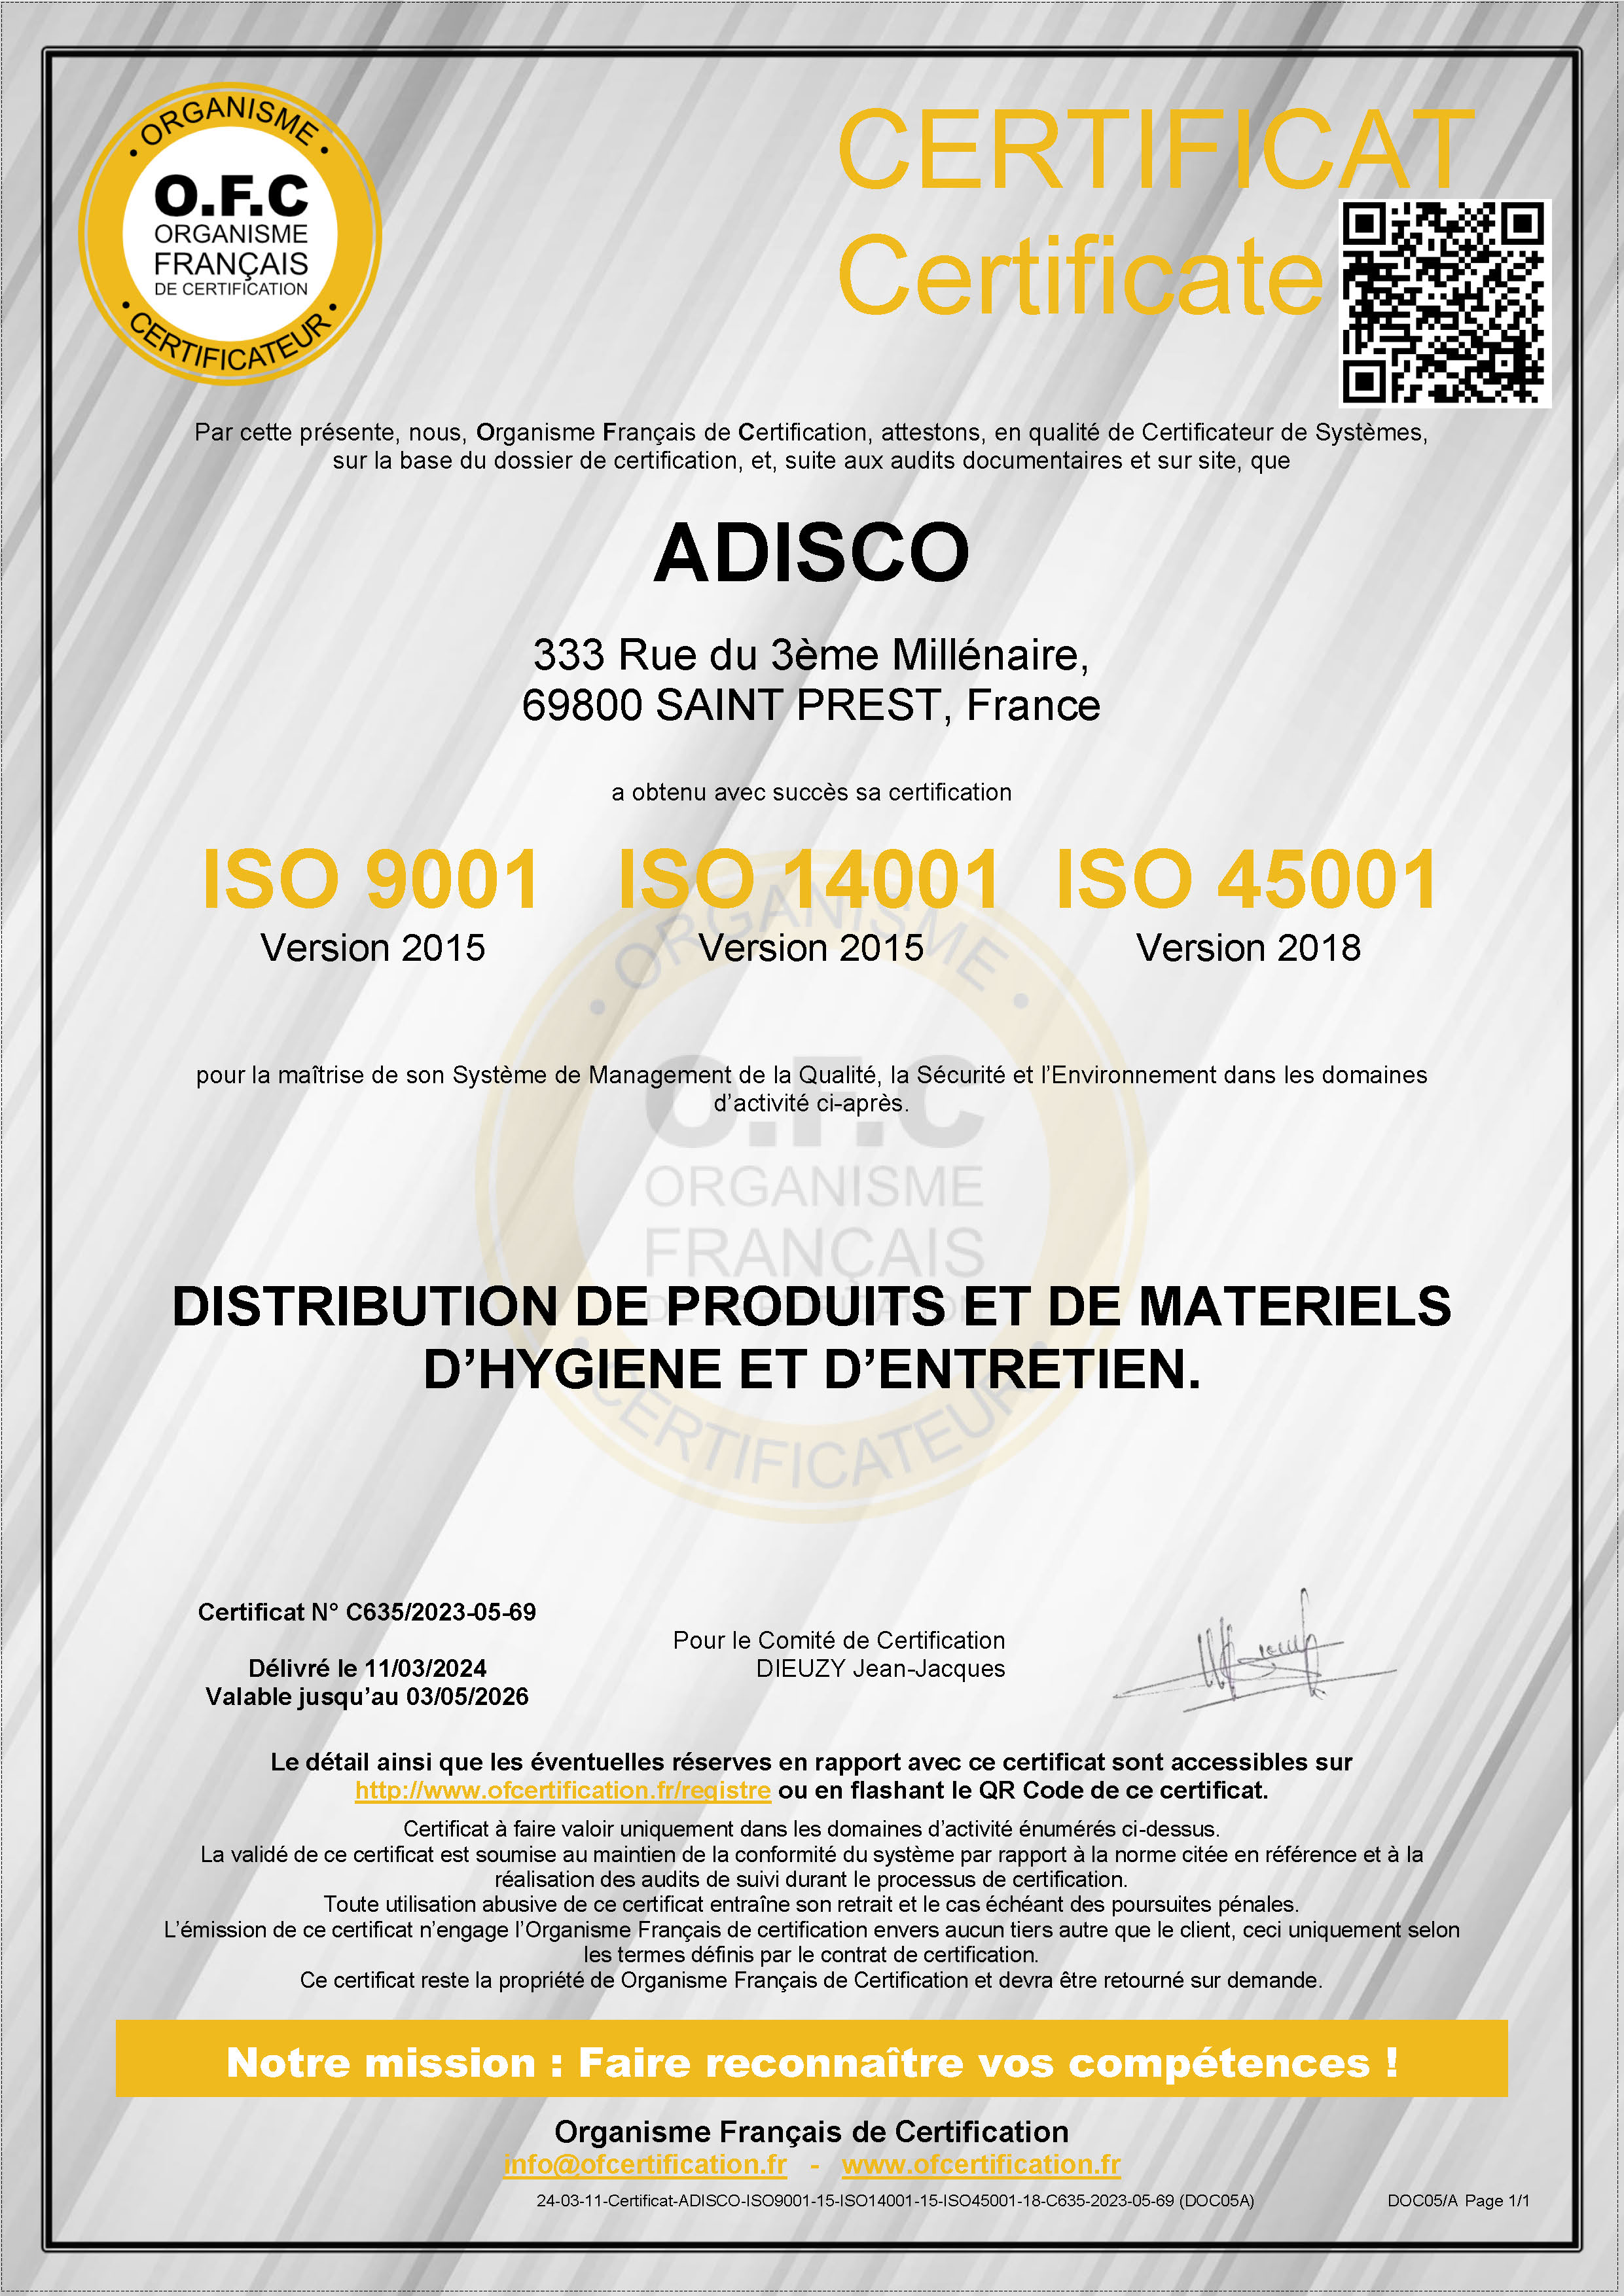 ISO 14001, ISO 9001, and ISO 45001 Certifications: ADISCO's Commitment to Corporate Social Responsibility (CSR)